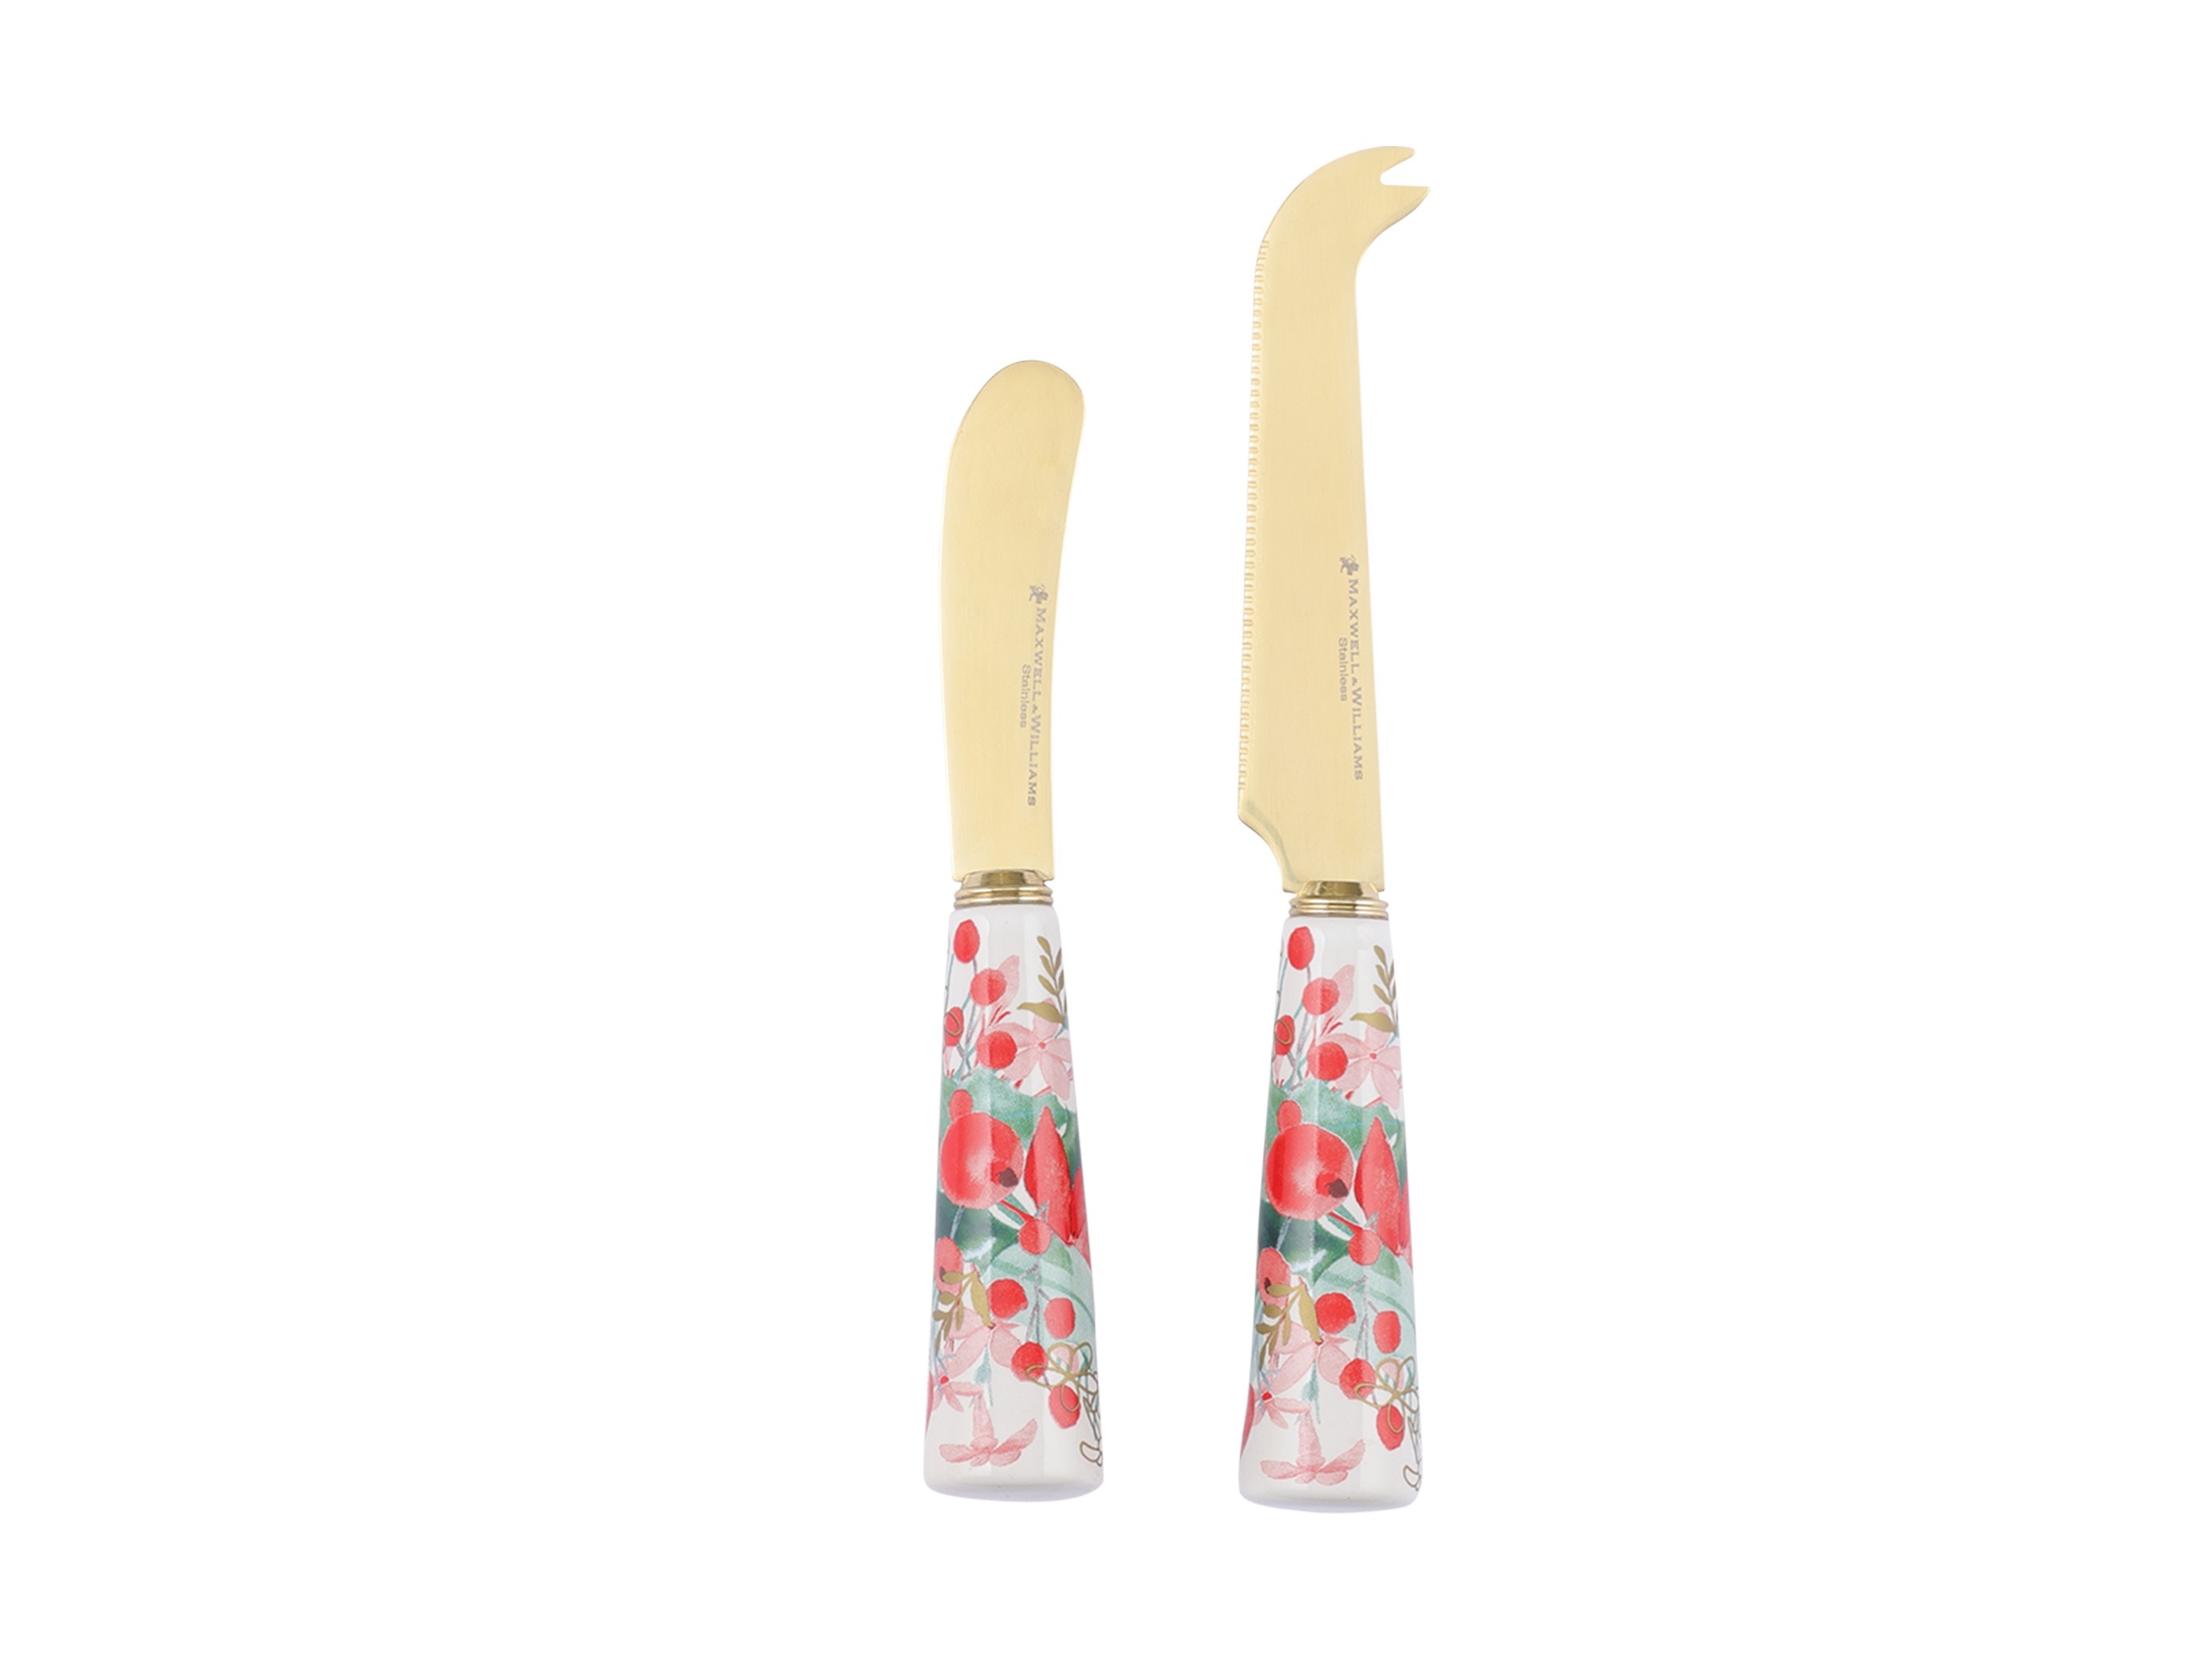 Maxwell & Williams Merry Berry Spreader & Cheese Knife Set Gift Boxed